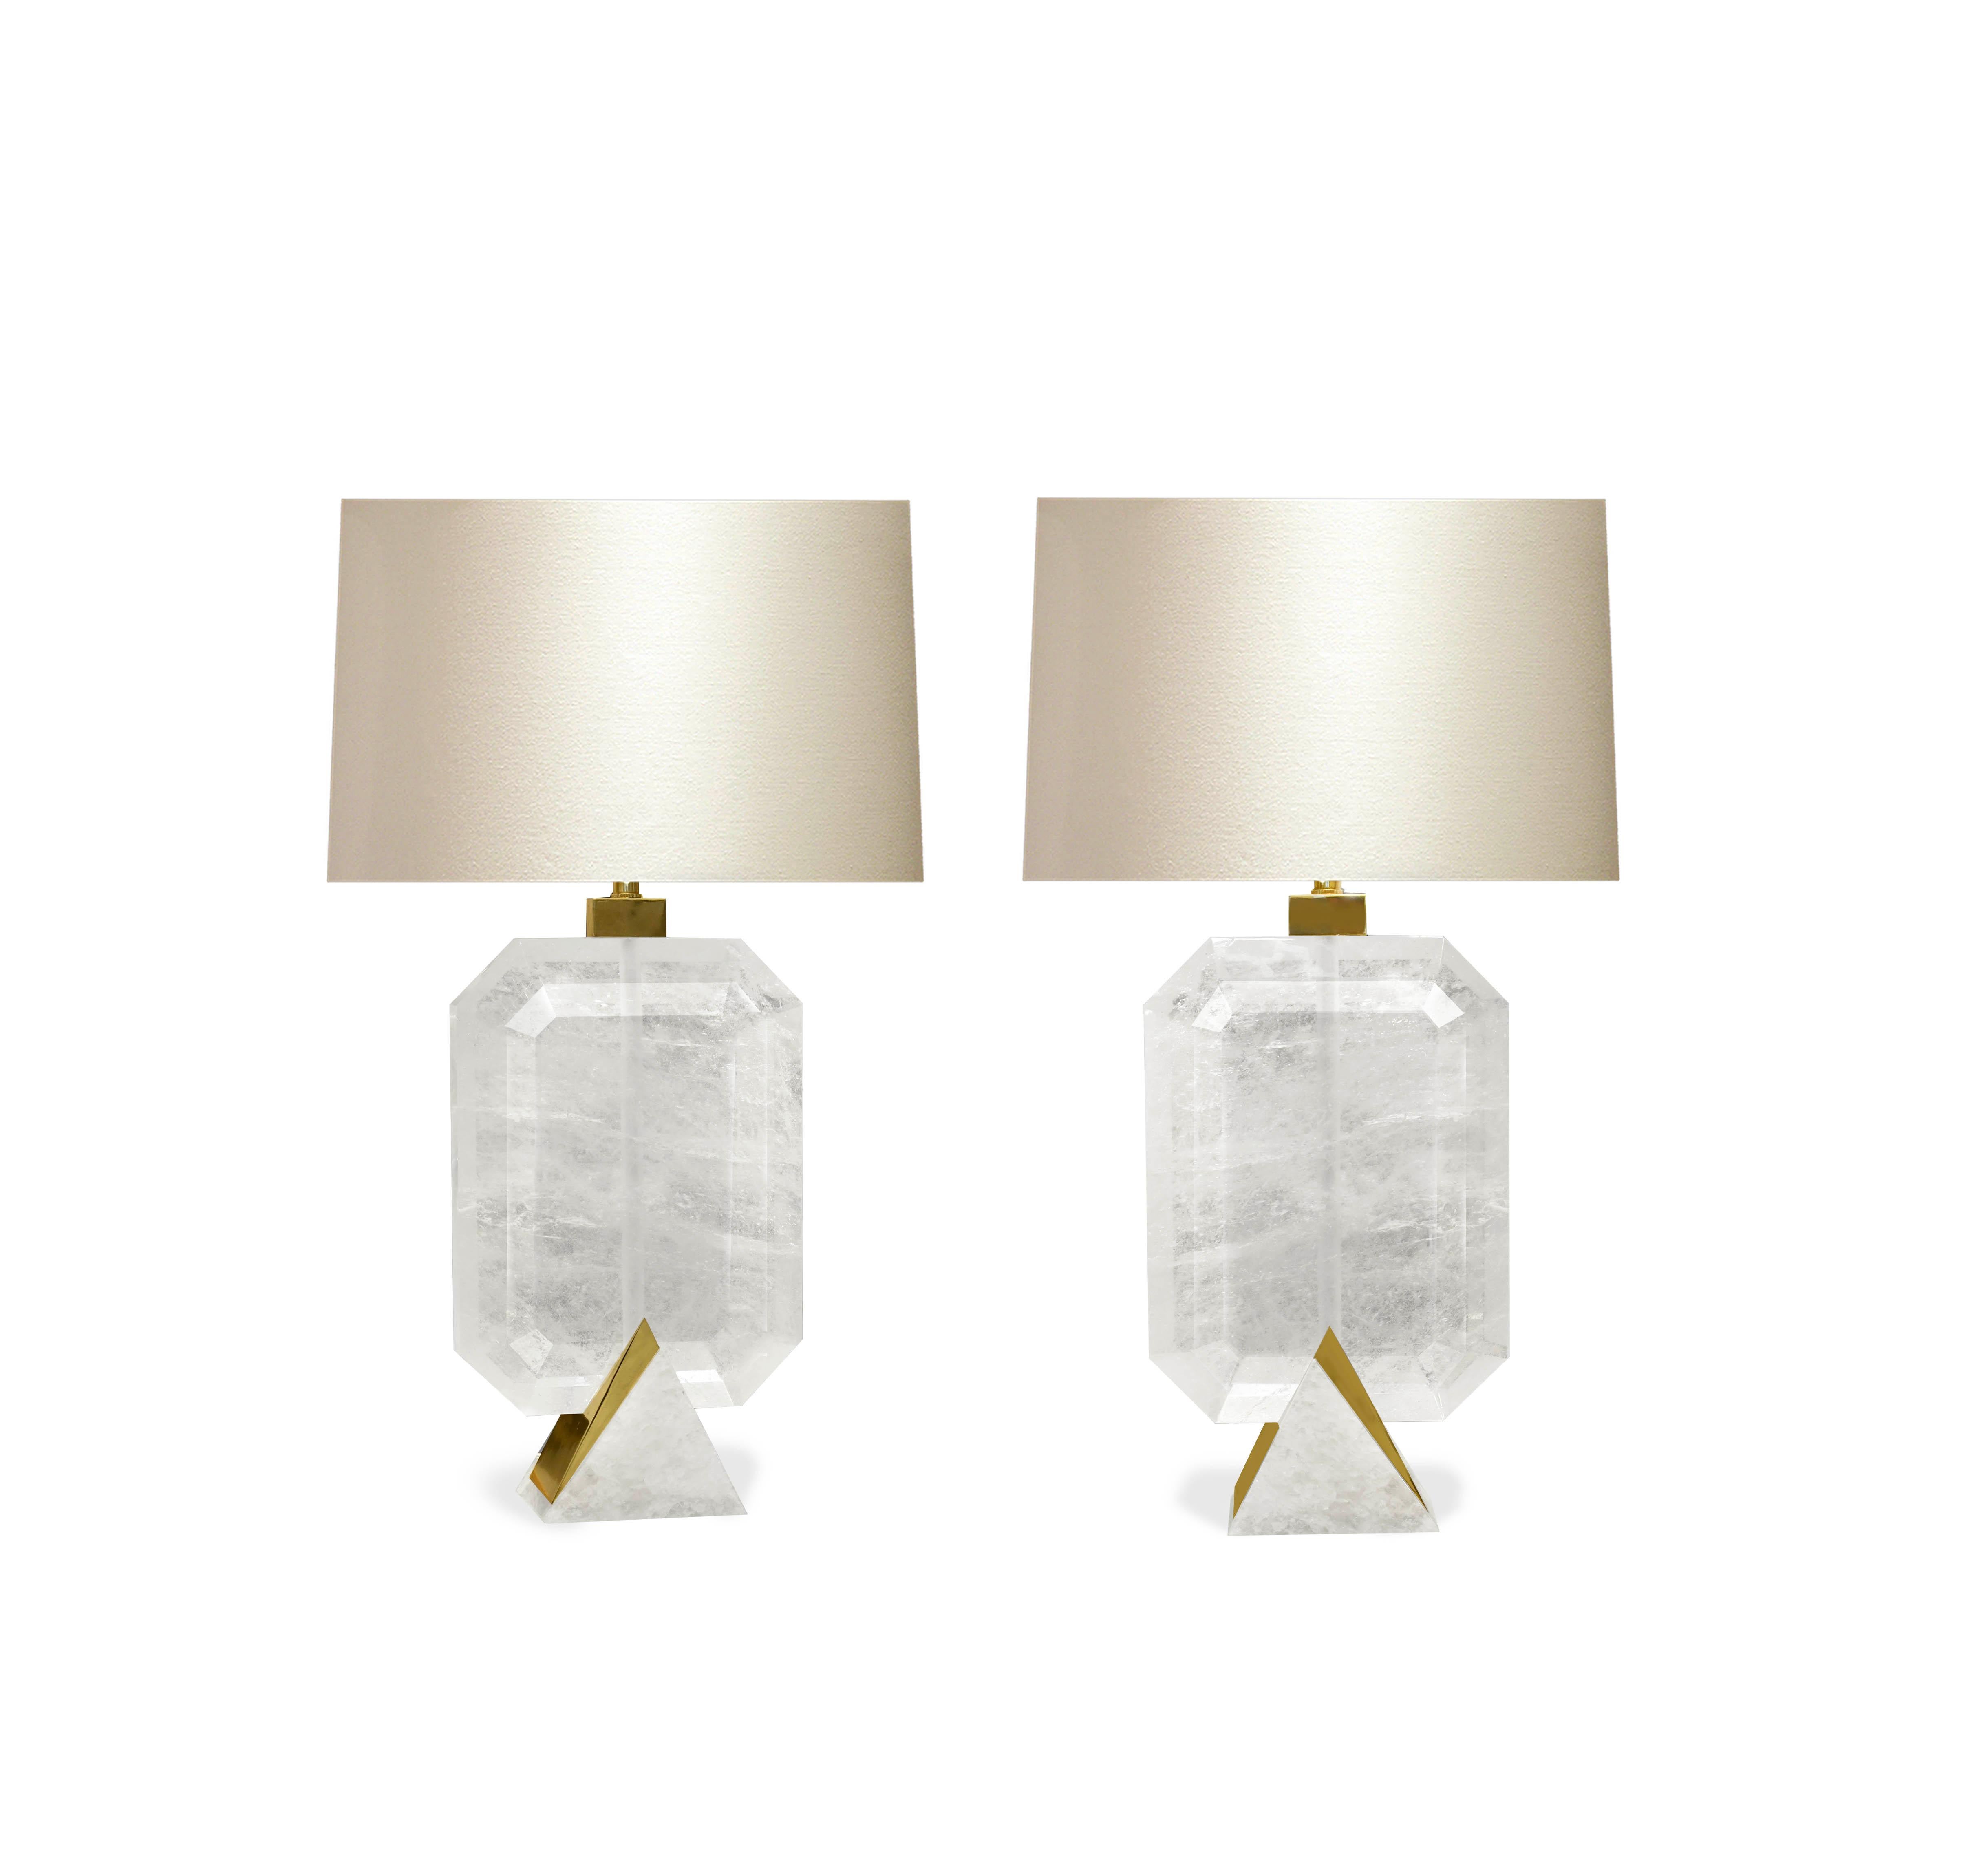 A pair of fine carved diamond form rock crystal lamps with polished brass bases. Created by Phoenix Gallery.
Each lamp installs 2 sockets.
To the top of rock crystal height 17 inch.
(Lampshade not included).